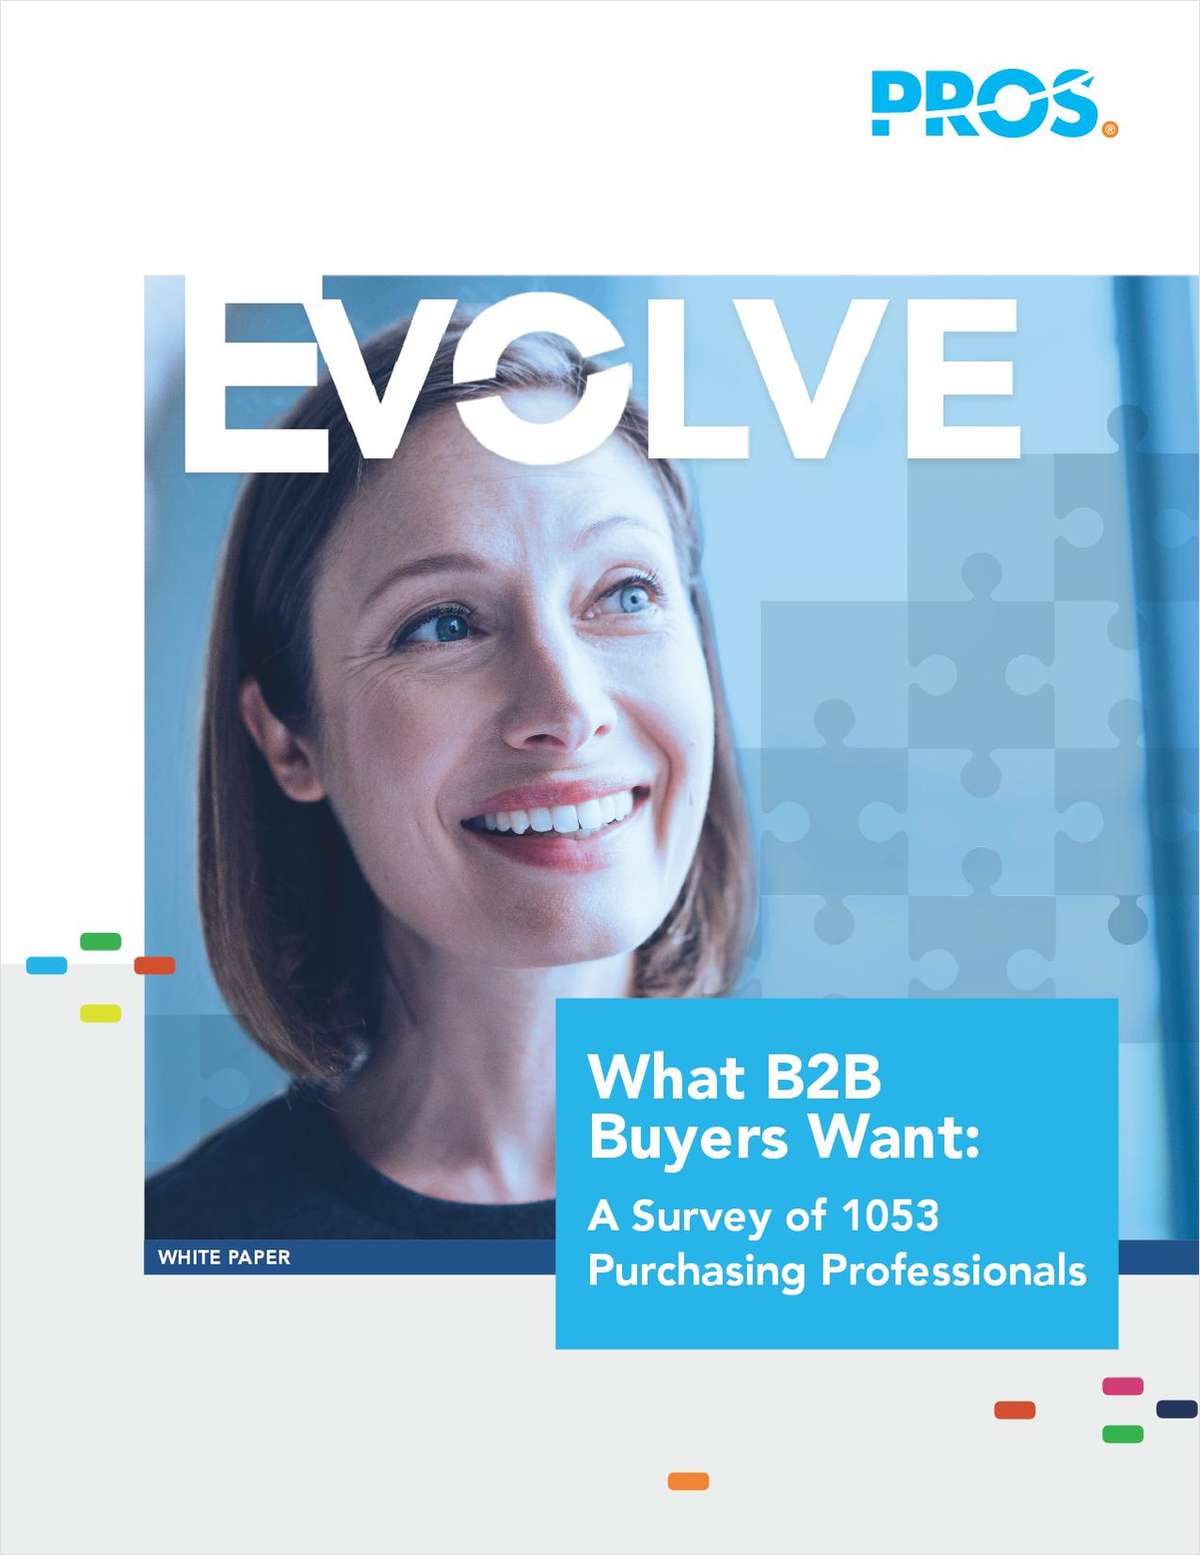 What B2B Buyers Want: A Survey of 1053 Purchasing Professionals